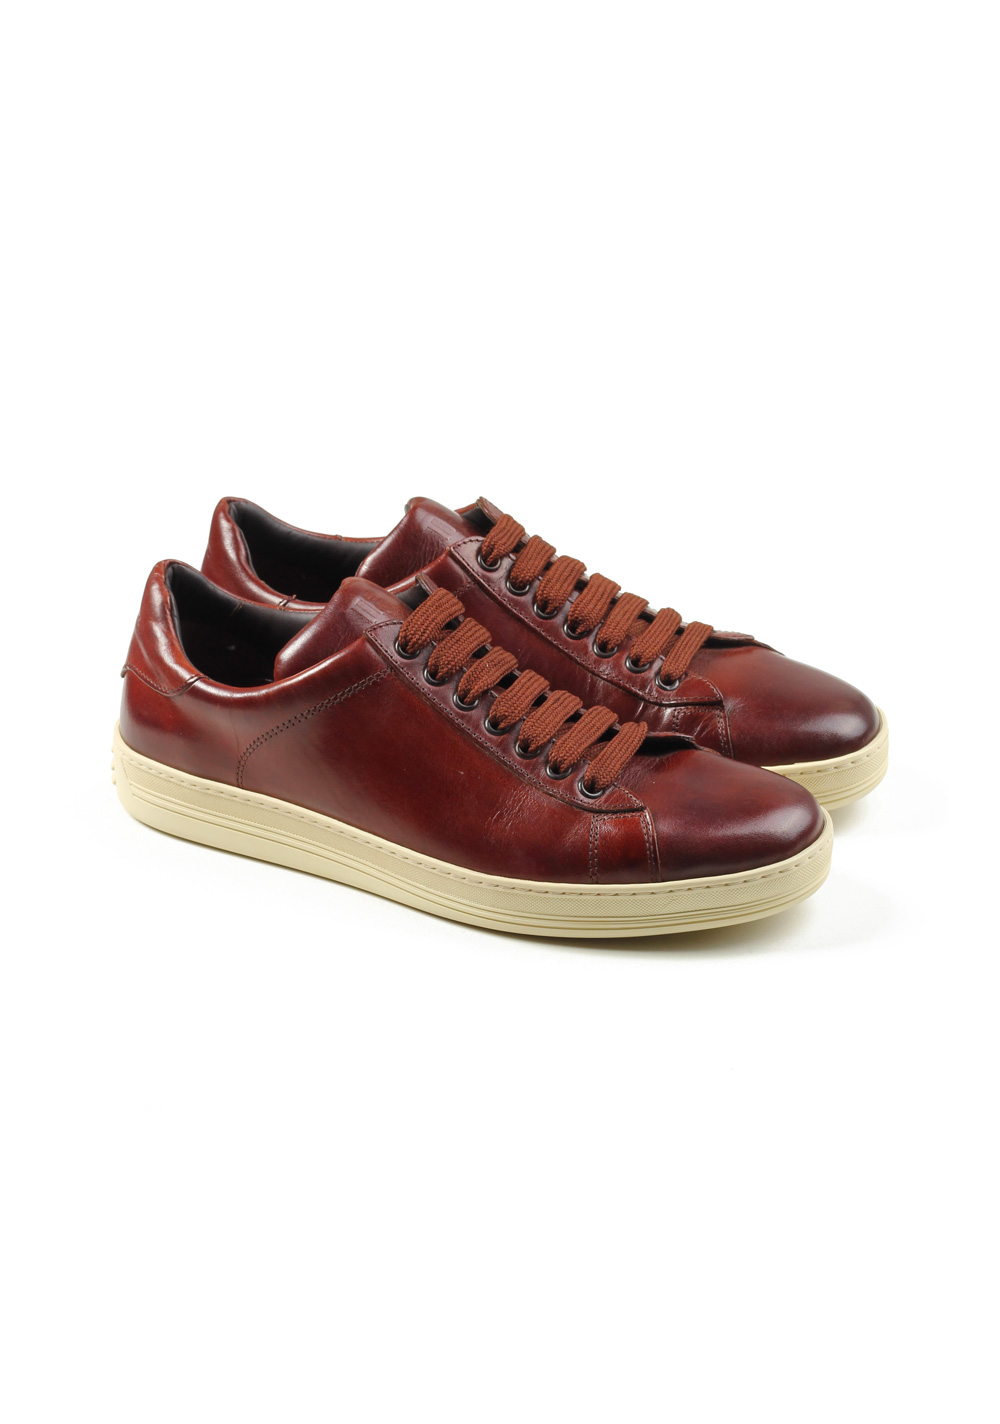 TOM FORD Russel Low Top Brown Leather Sneaker Shoes Size 7.5 UK / 8.5 U.S. | Costume Limité